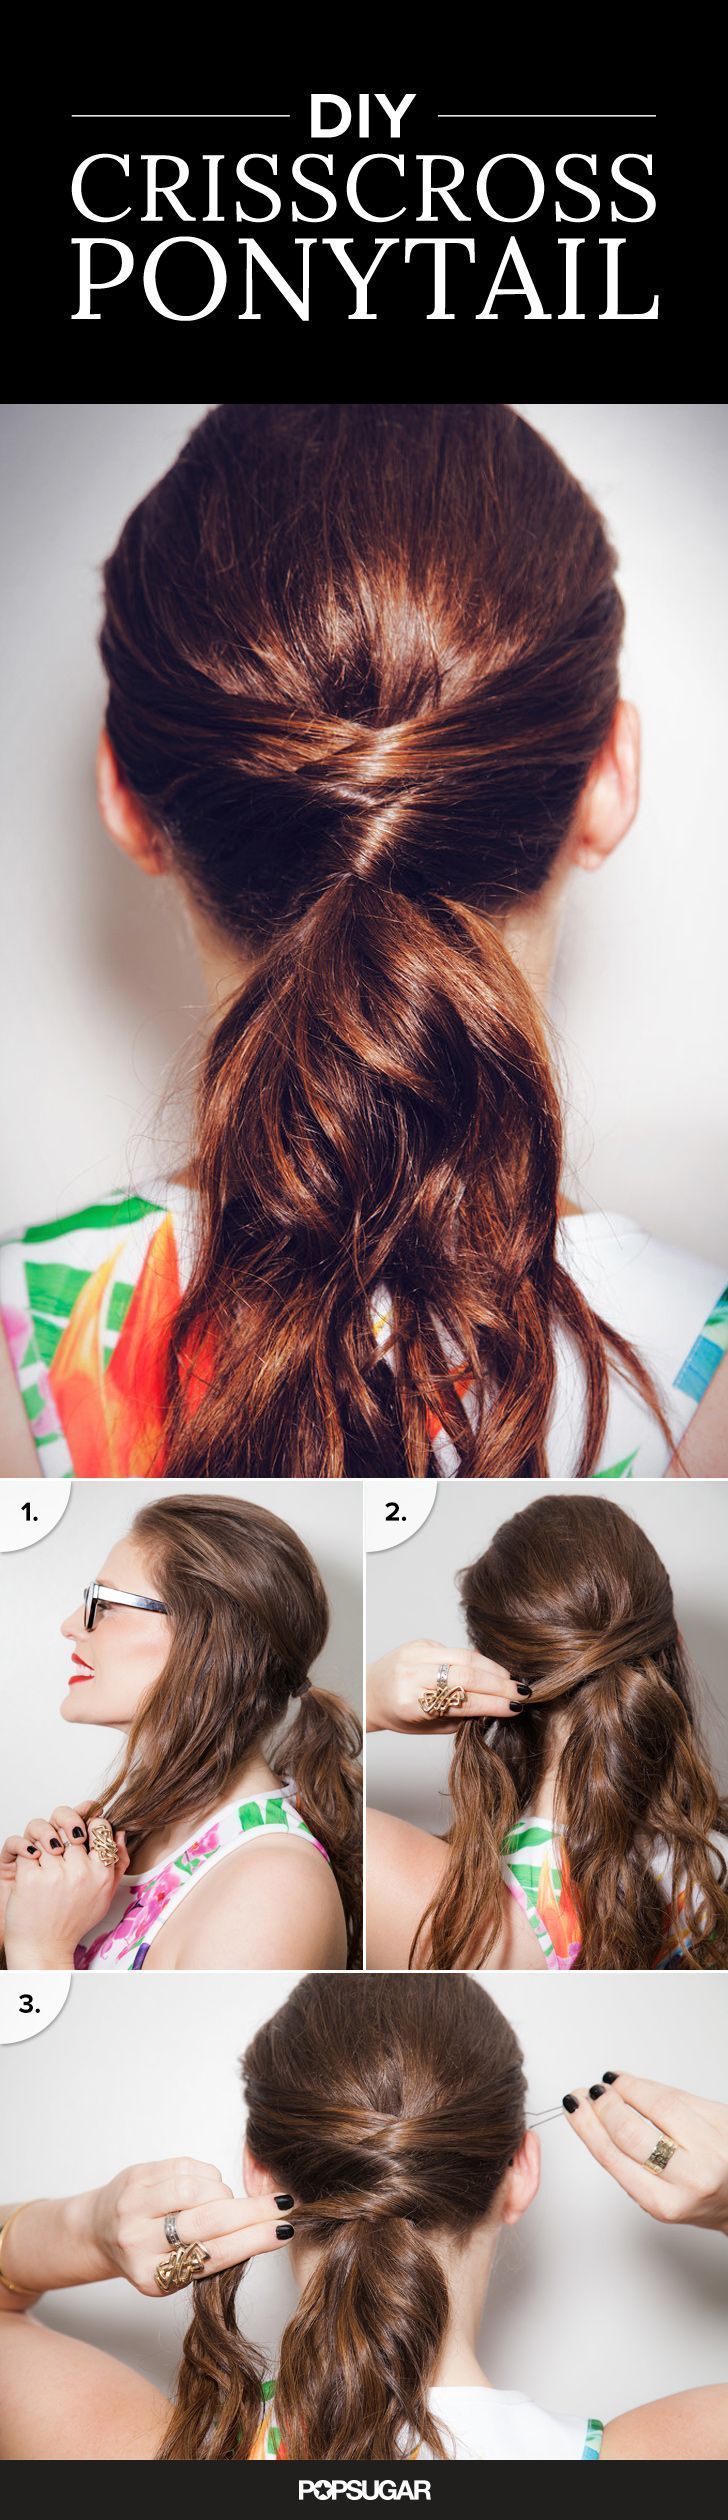 DIY that awesome crisscross ponytail you keep seeing on Pinterest with this simp...